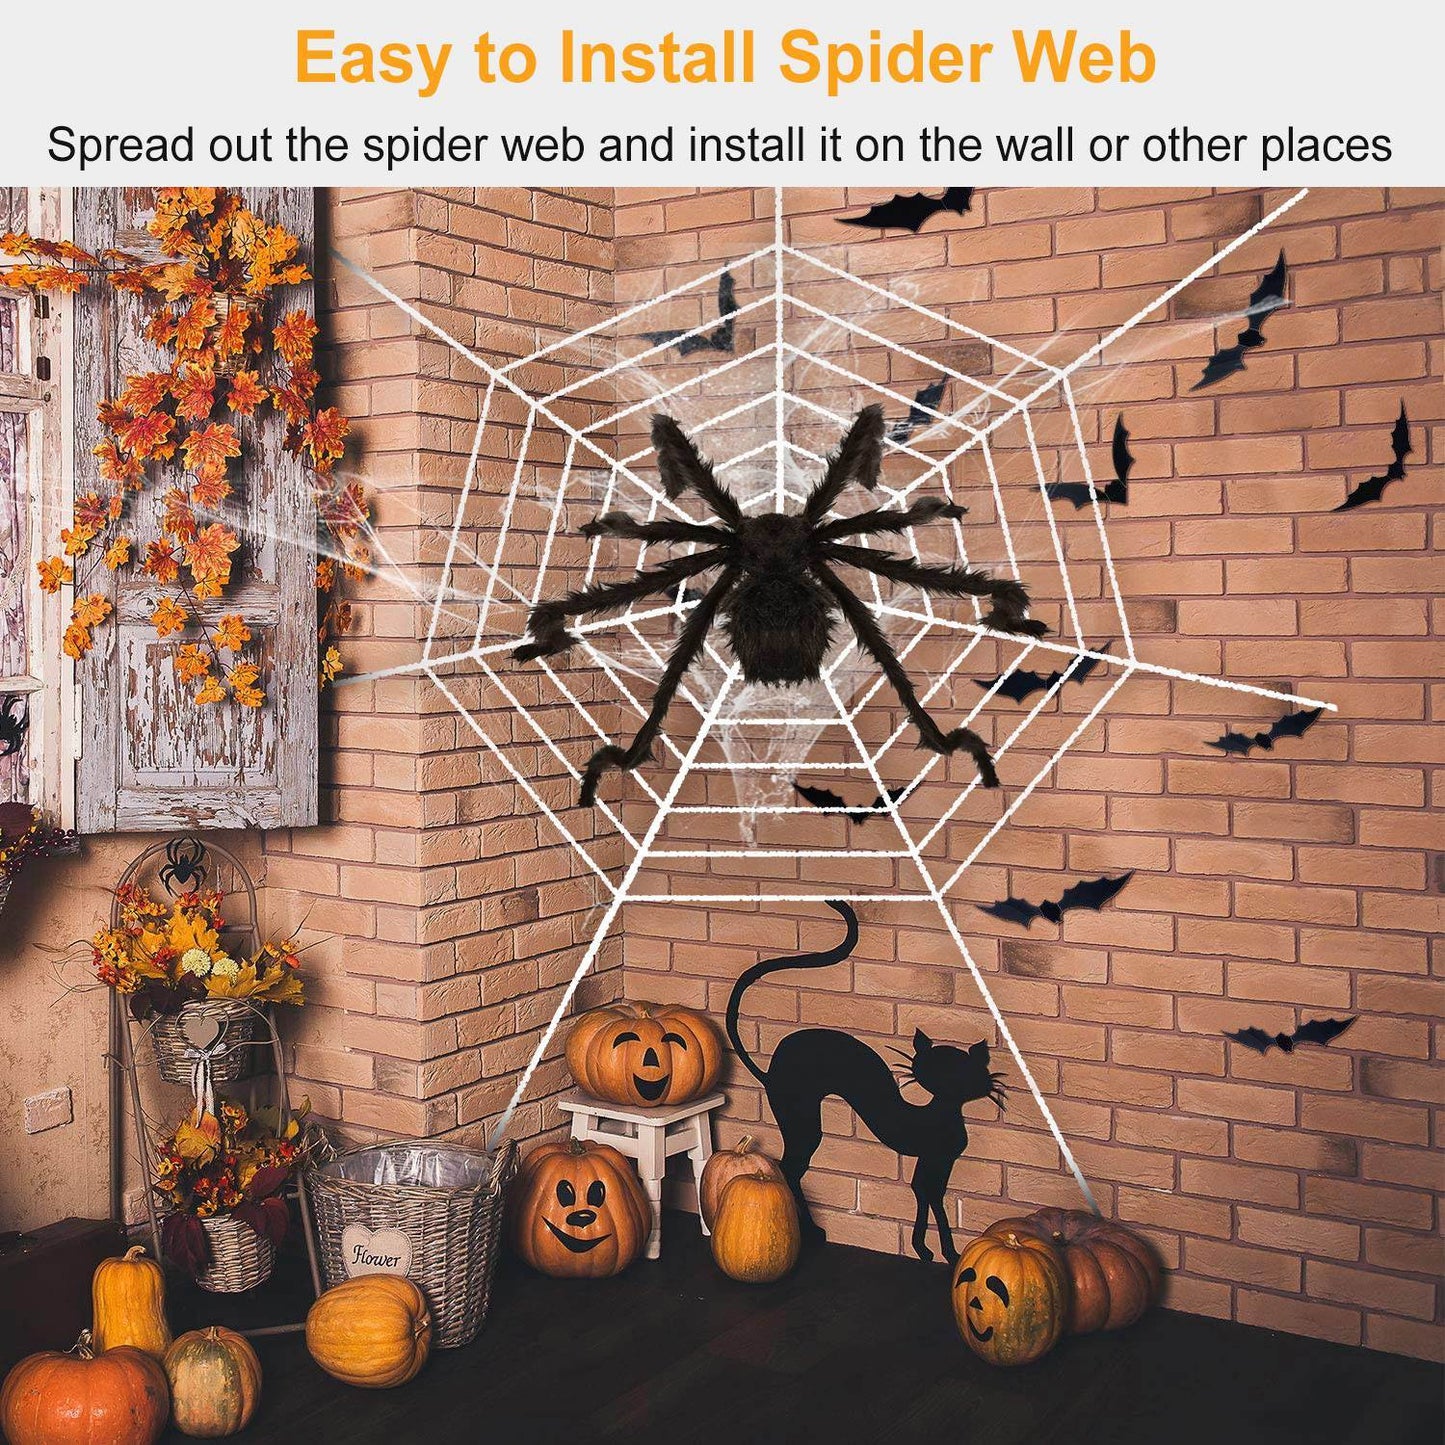 Halloween Decorations Spider Outdoor 59inch Halloween Spider with 126 inch Tarantula Mega Spider Web Hairy Poseable Scary Spider